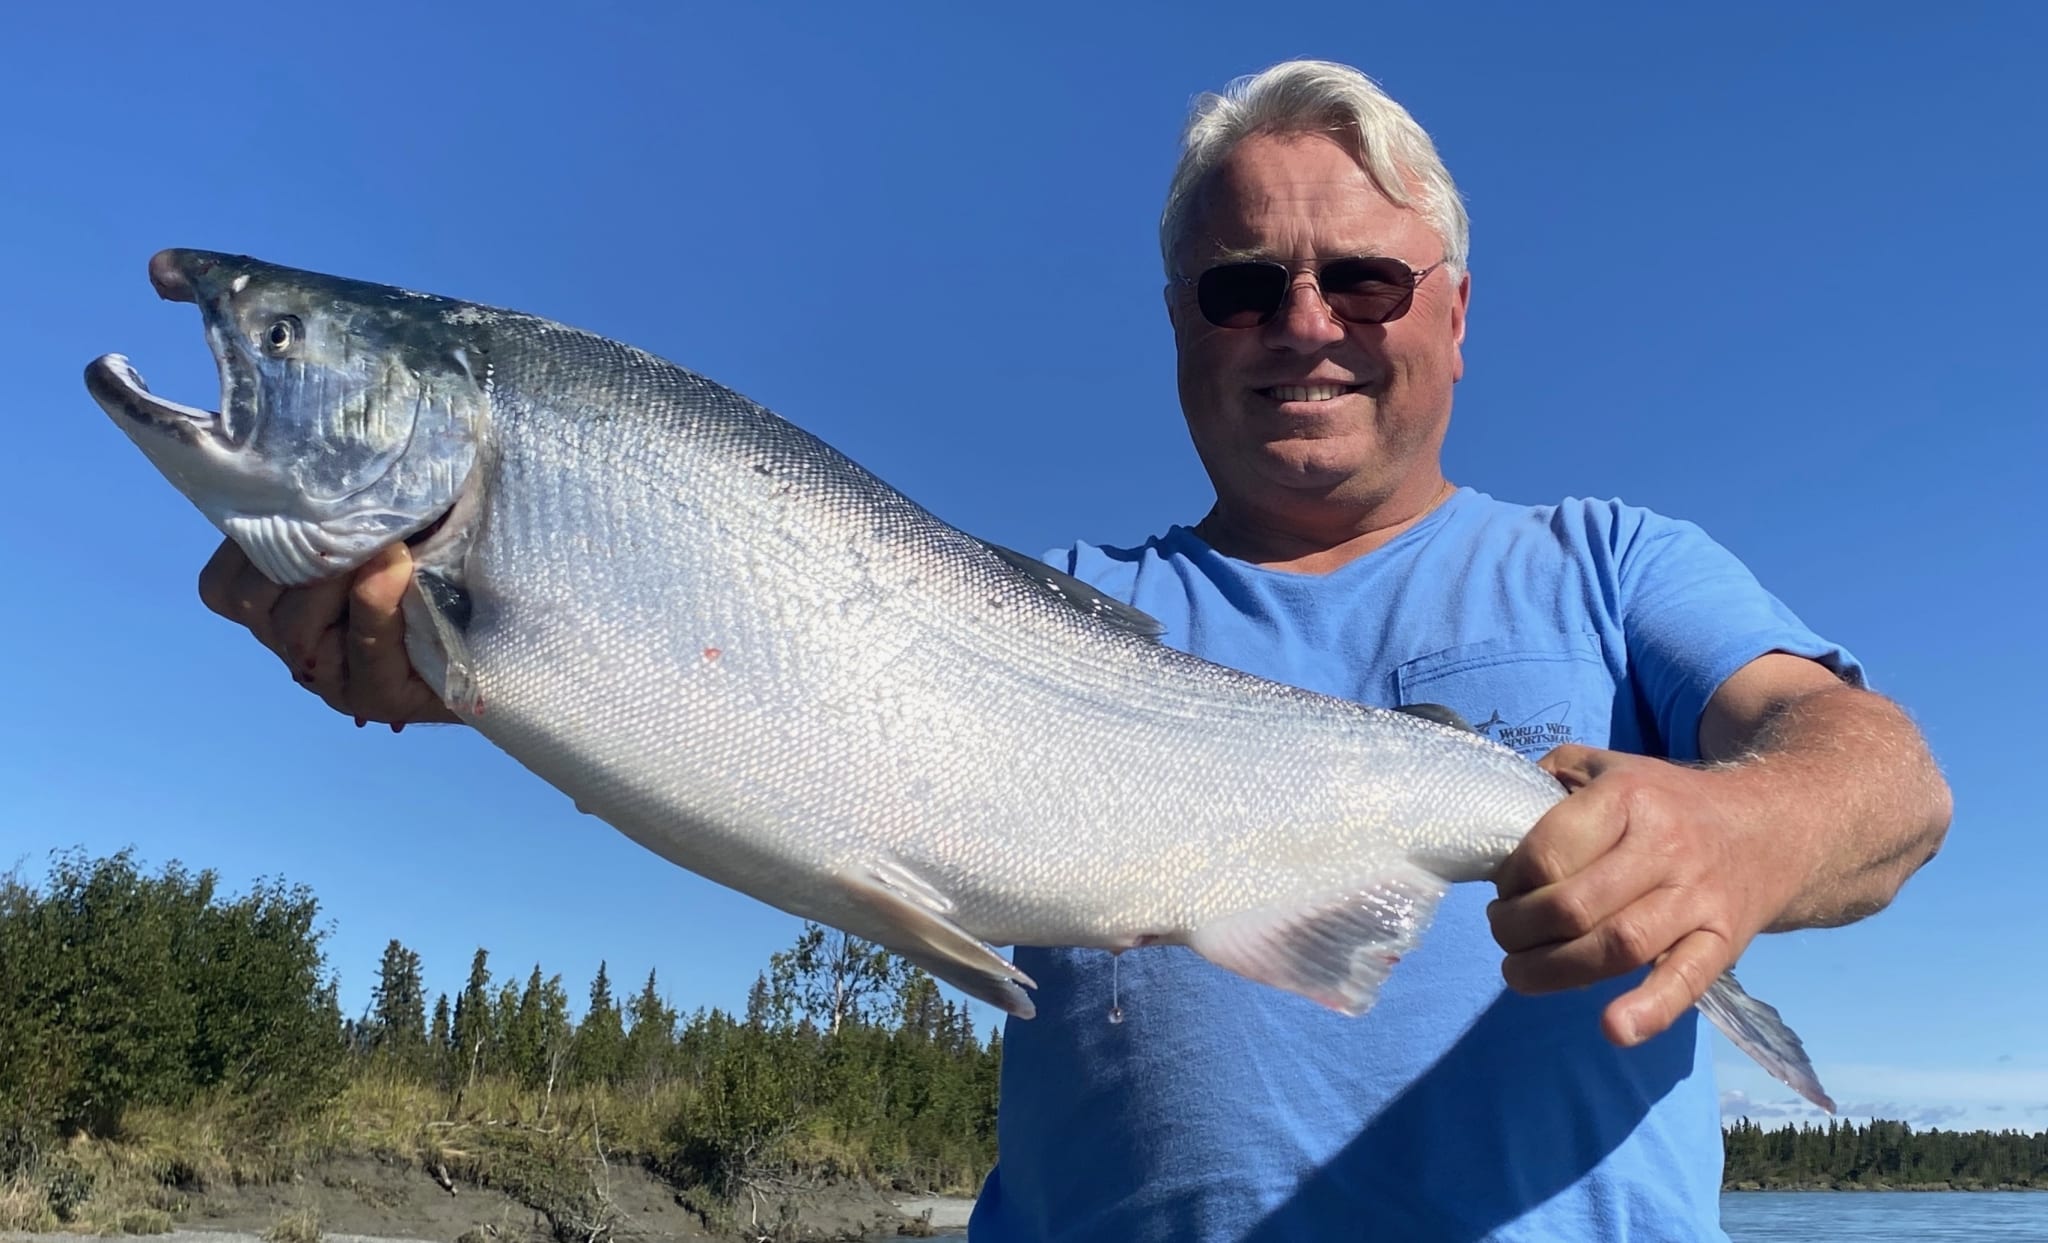 A proud angler hoists up a silver salmon caught while on an Alaskan fishing trip.